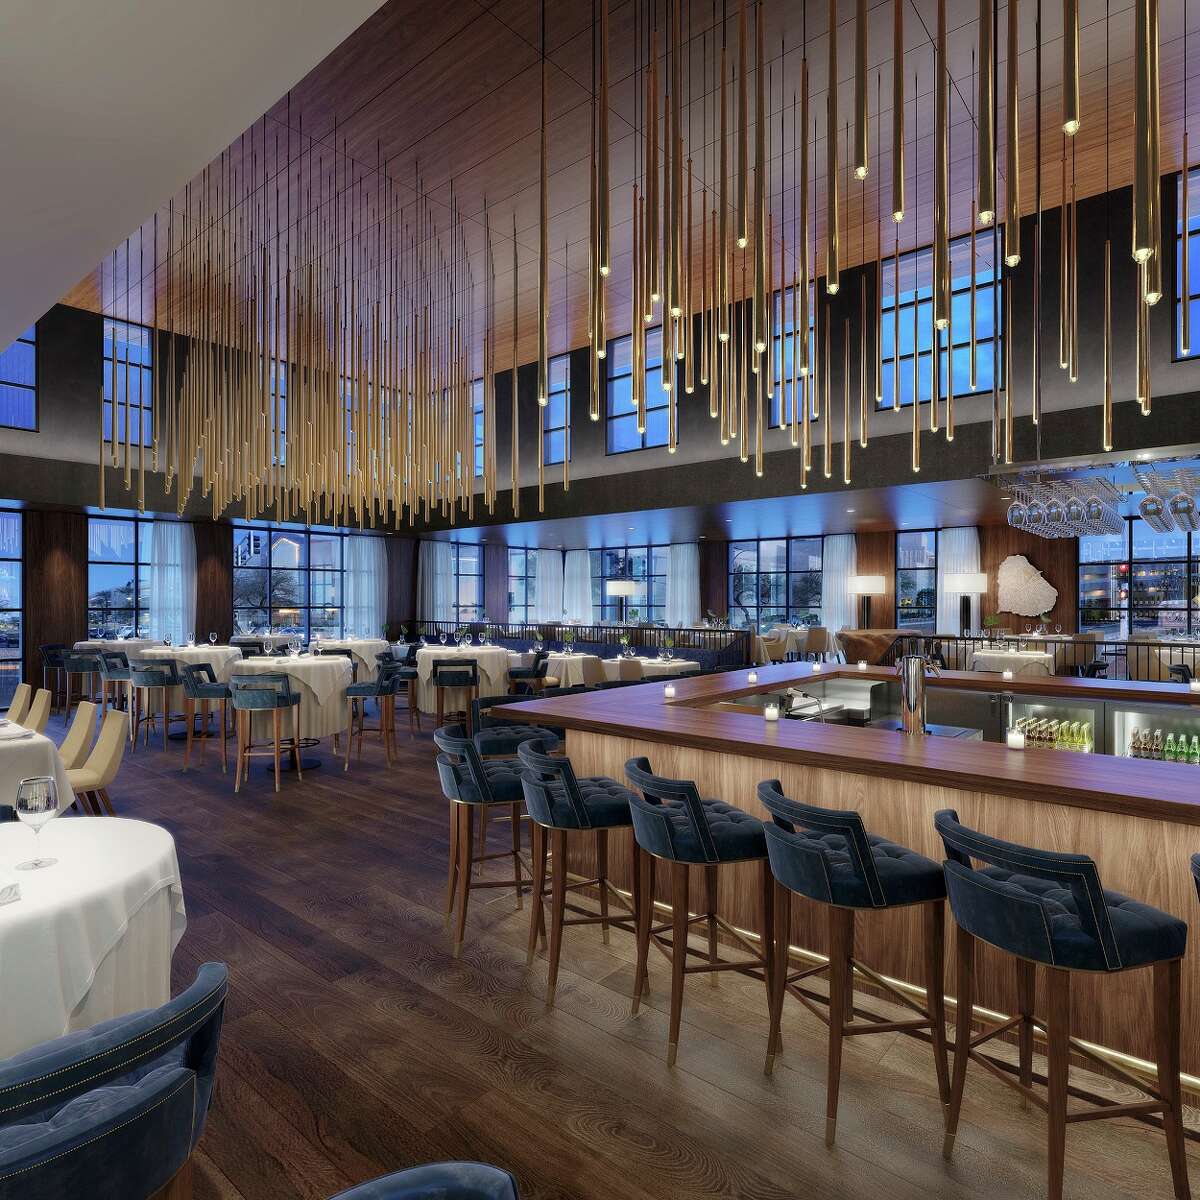 The owners of Houston's Steak 48 will open a new seafood-centric restaurant concept, Ocean 44, in Scottsdale, Ariz., in November. Plans are to bring the concept to Houston. Shown: Renderings of Ocean 44.